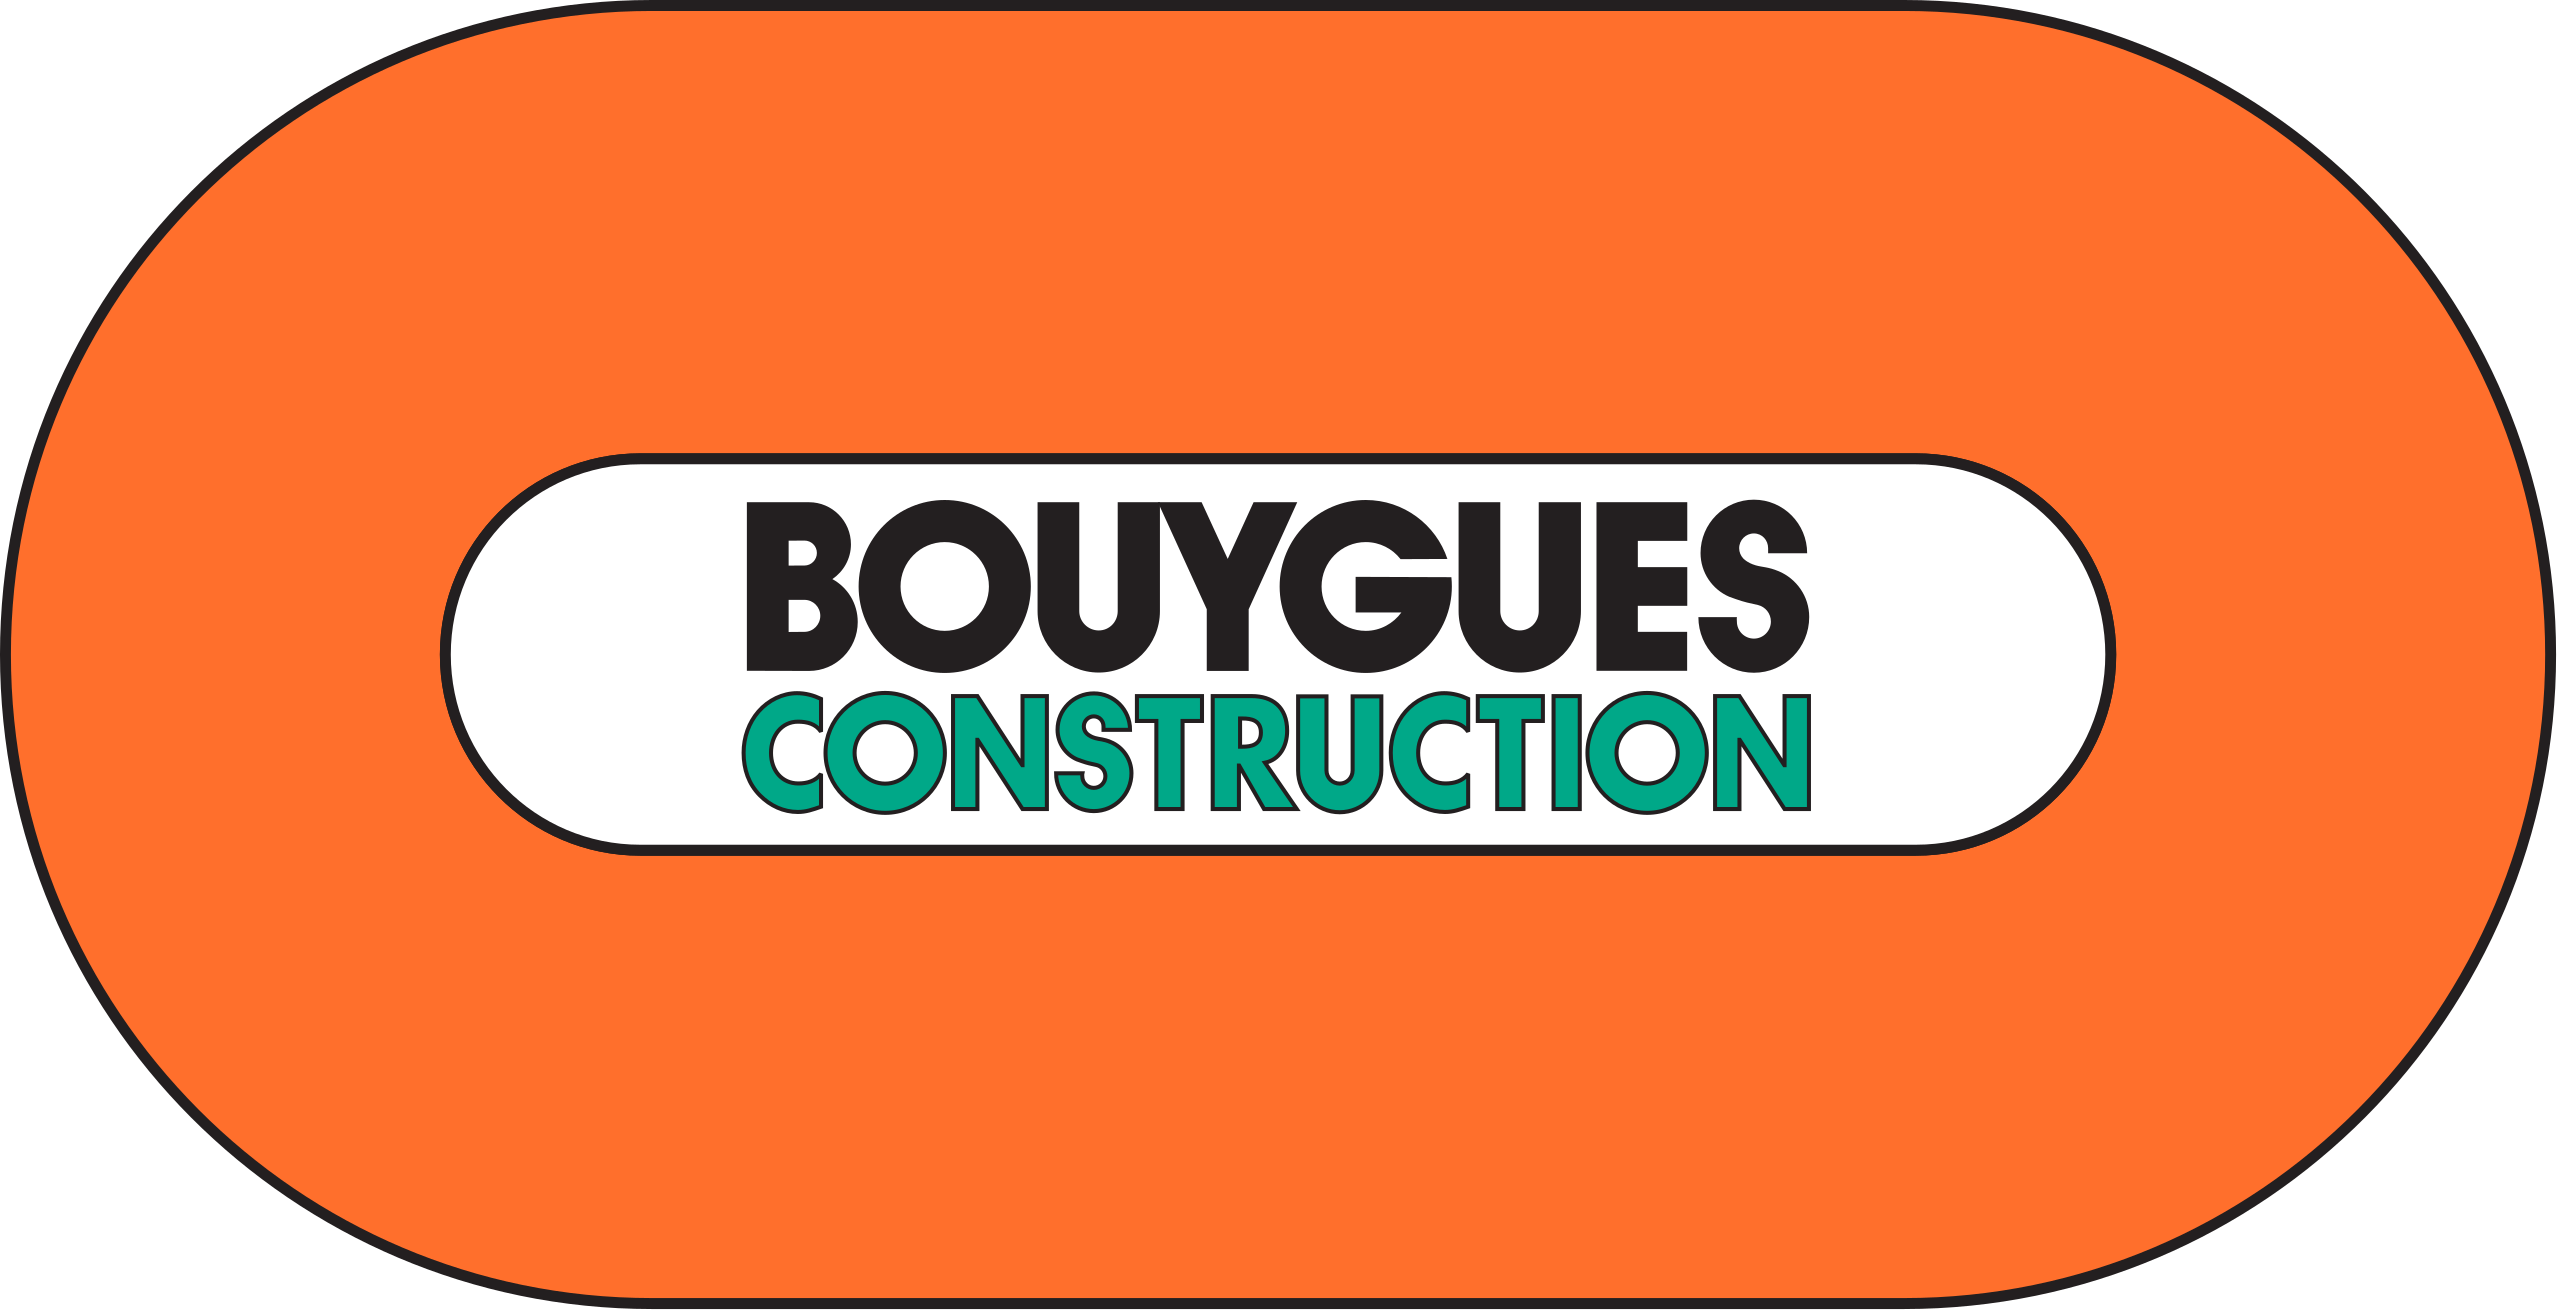 bouygues construction namr